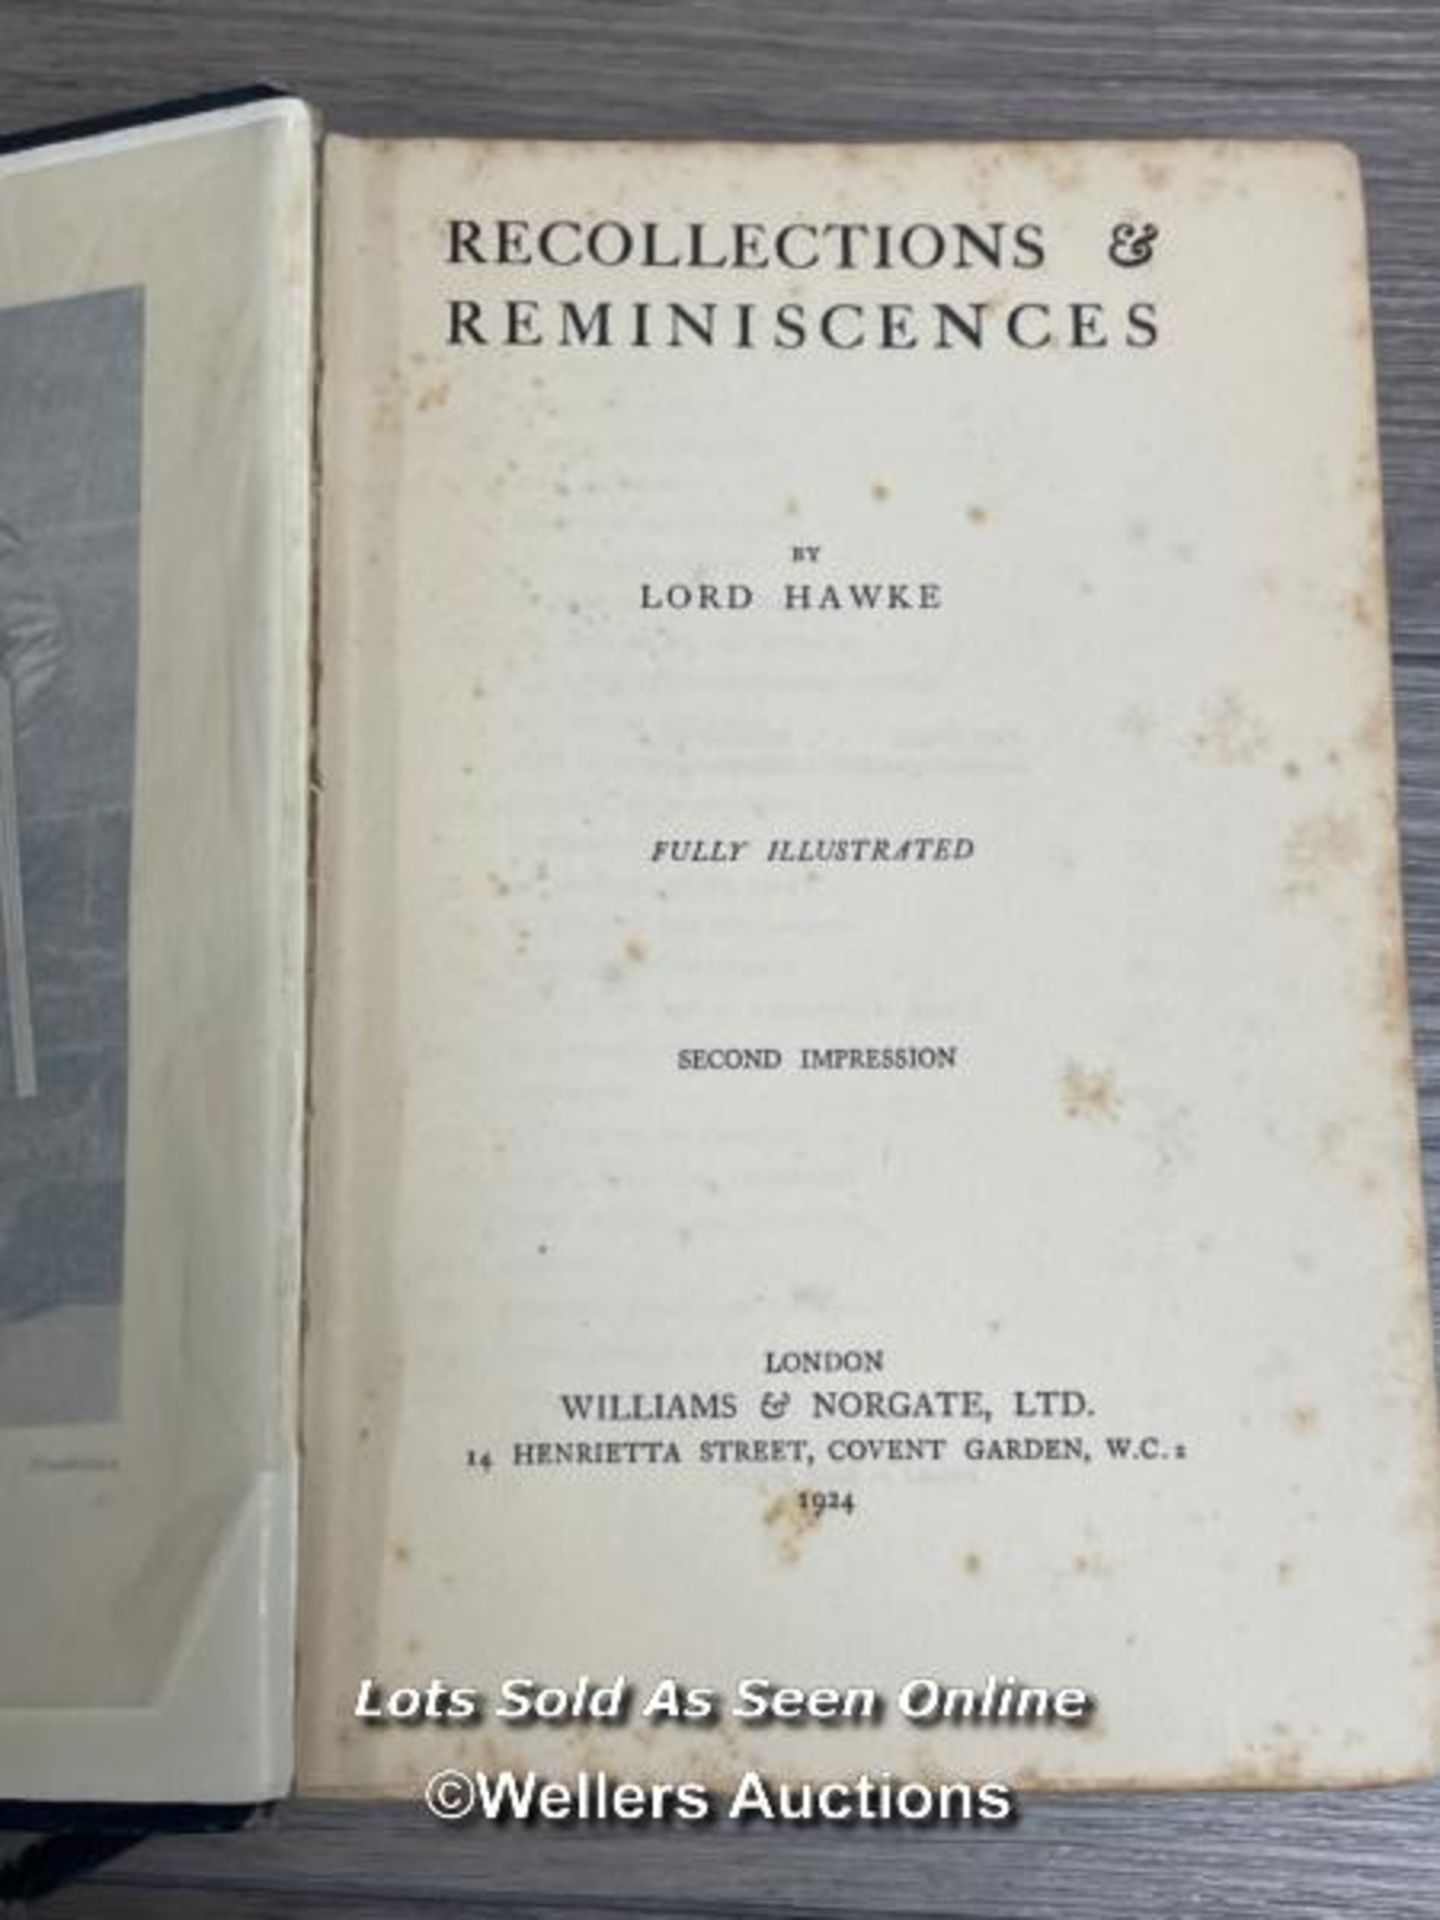 CRICKET - RECOLLECTIONS & REMINISCENCES BY LORD HAWKE SECOND IMPRESSION 1924 - Image 4 of 5